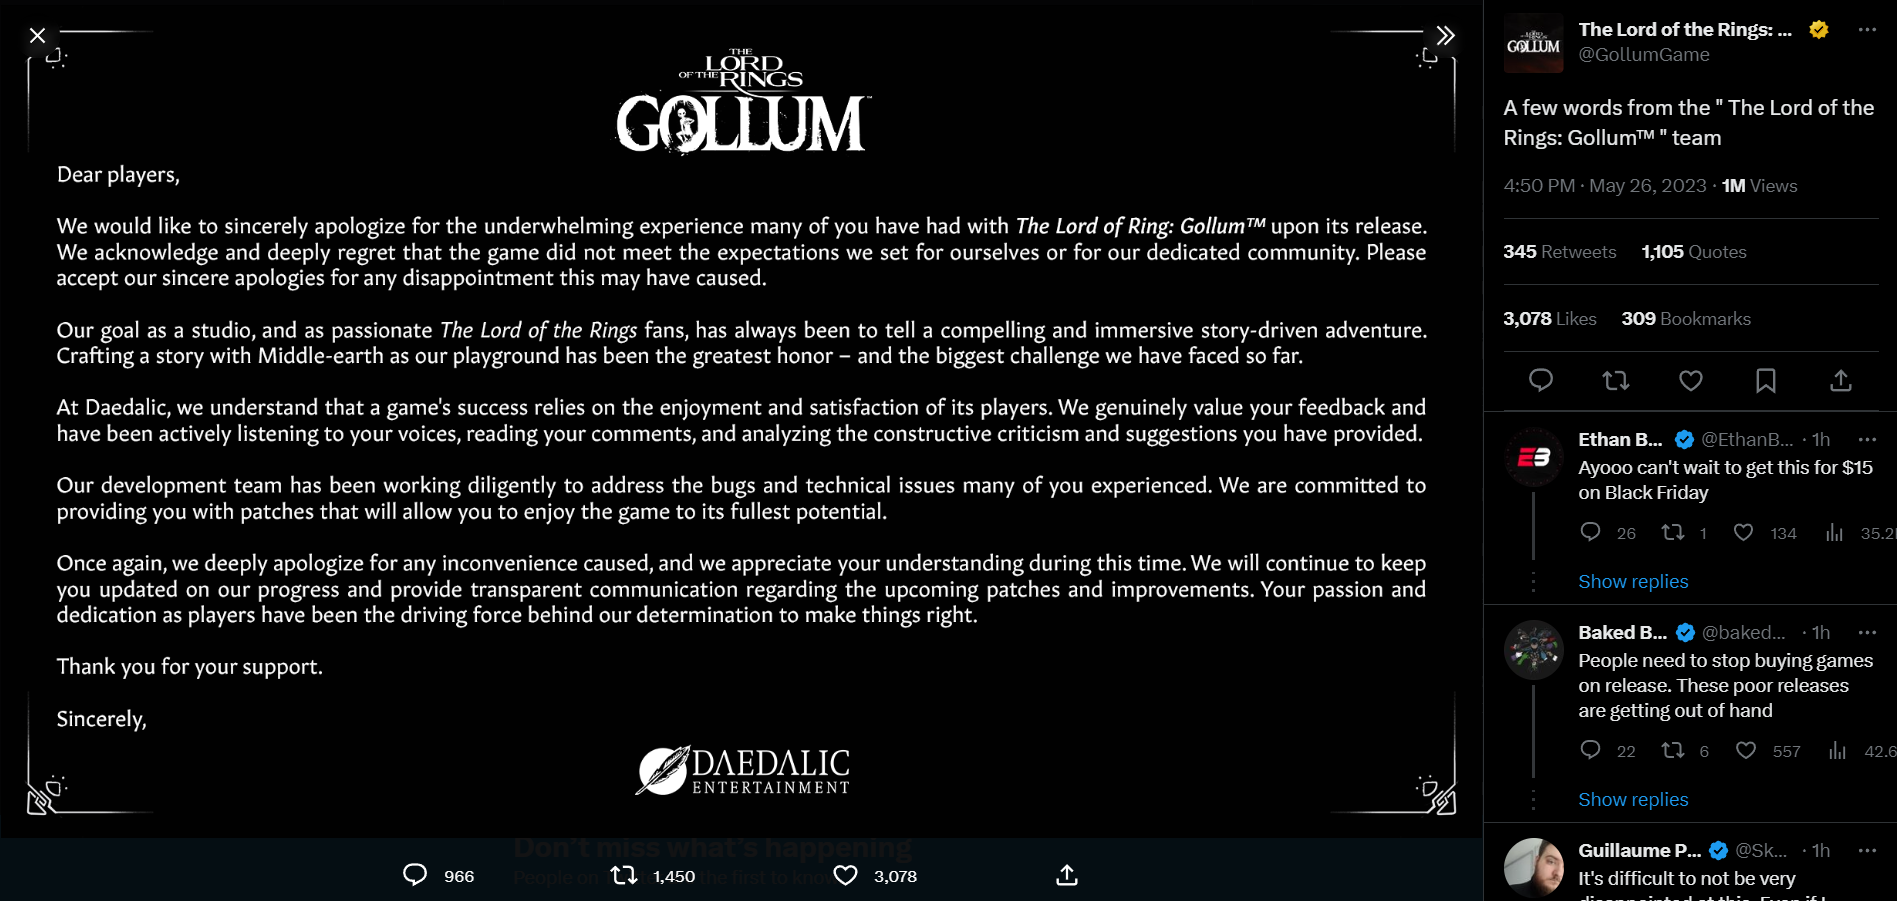 Daedalic Entertainment apologizes for The Lord of the Rings: Gollum via Twitter